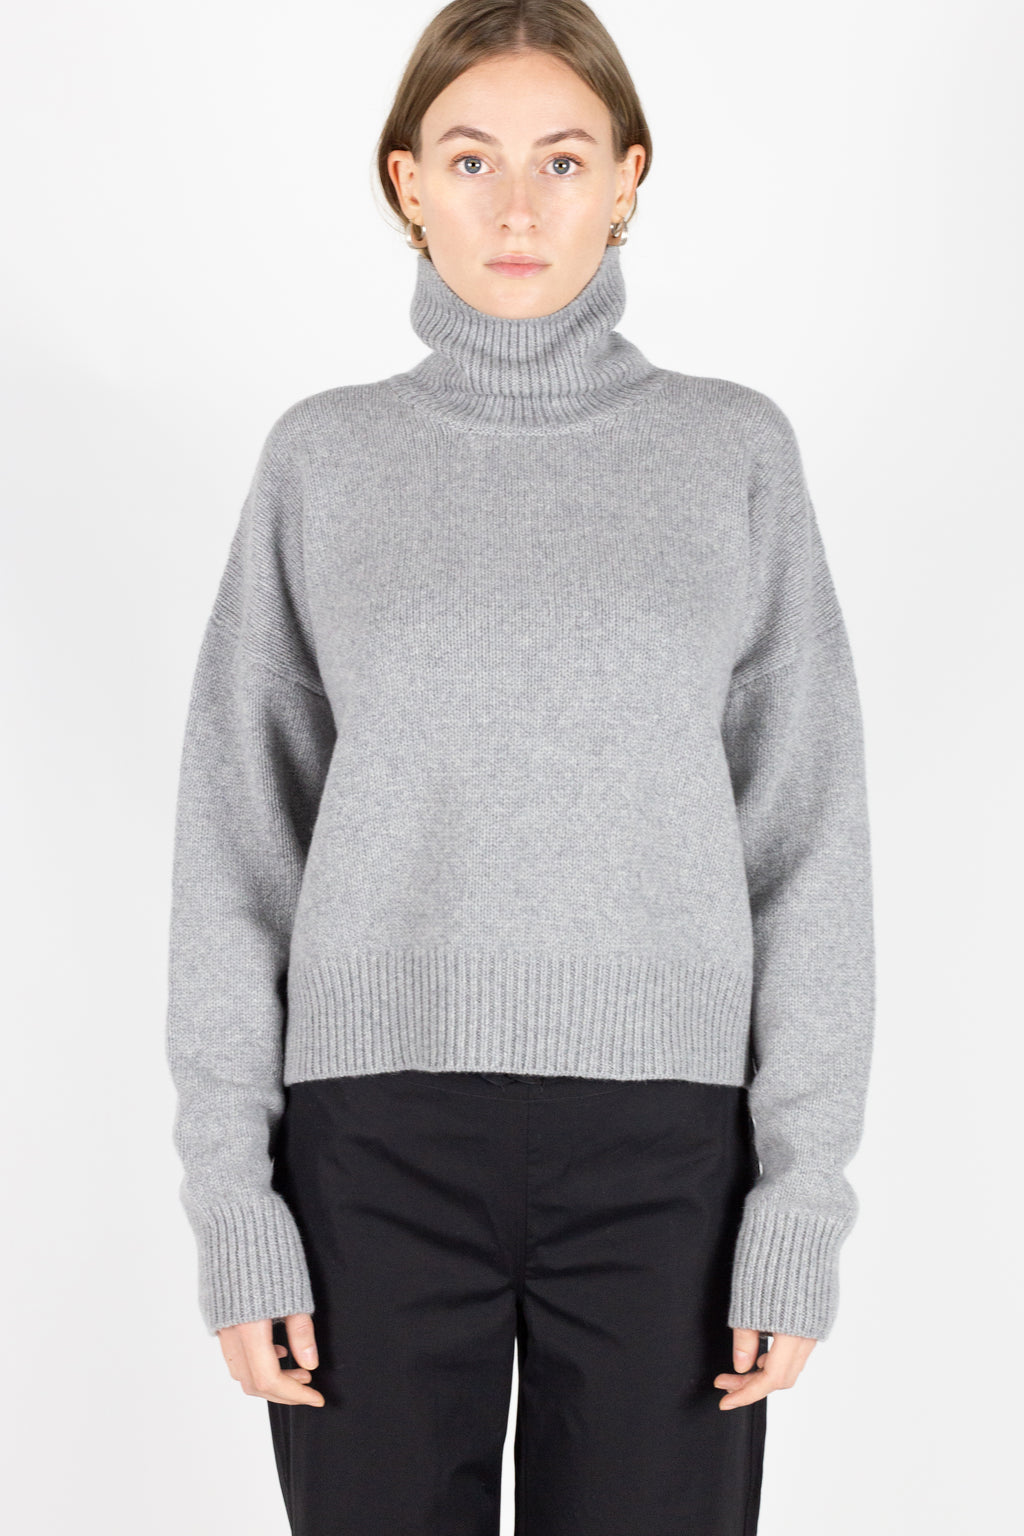 Roll neck sweater in grey cashmere.